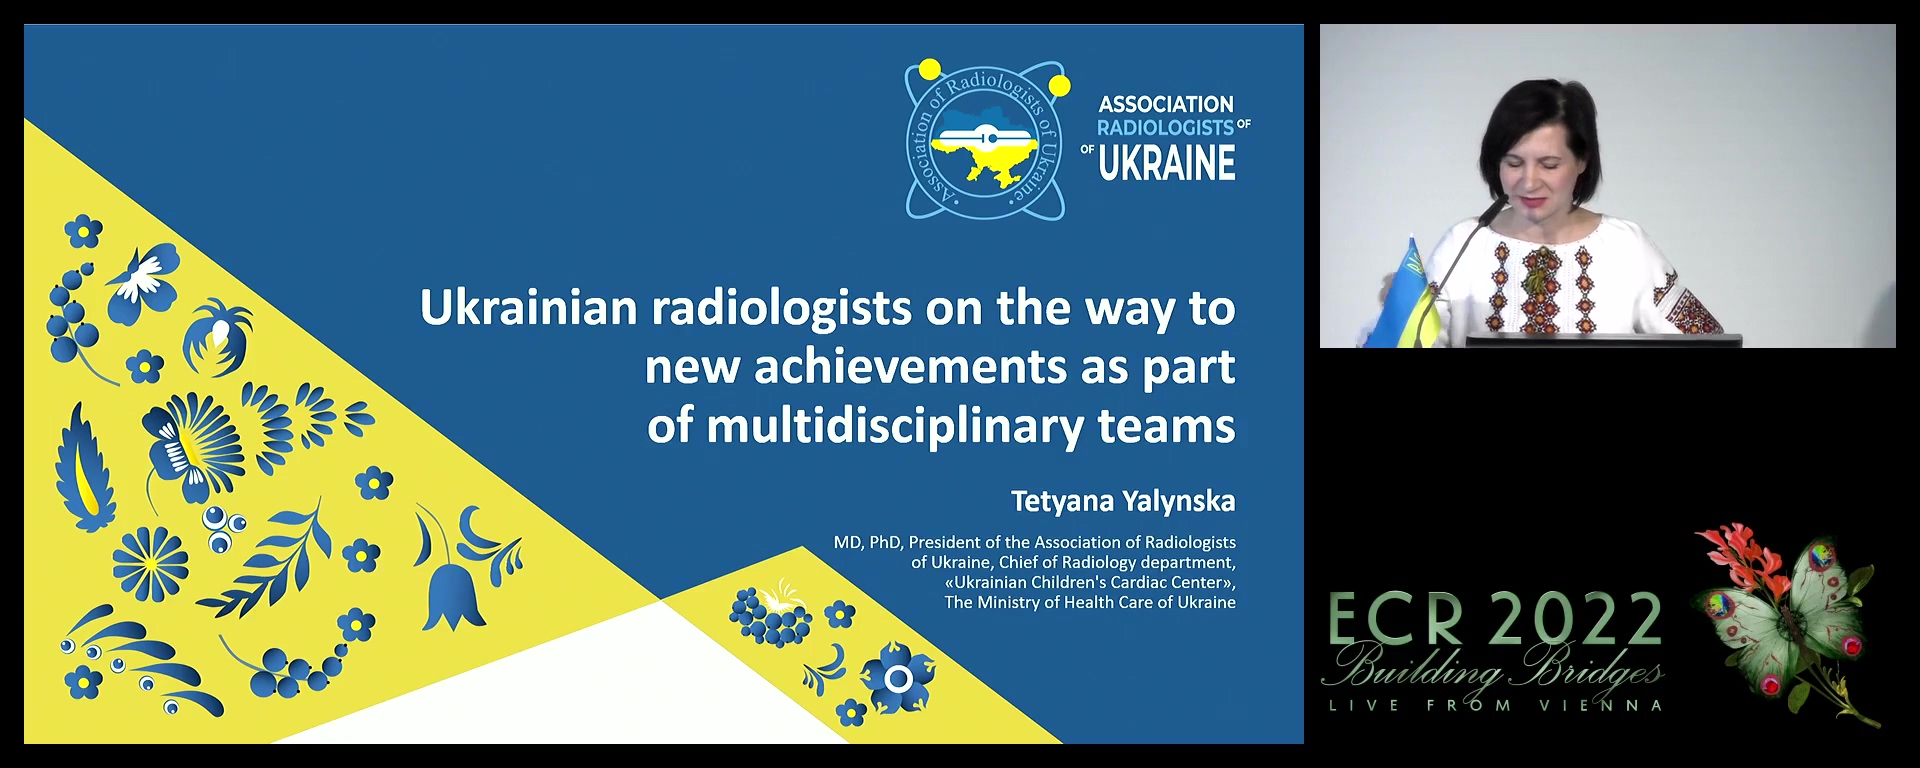 Introduction: Ukrainian radiologists on the way to new achievements as part of multidisciplinary teams